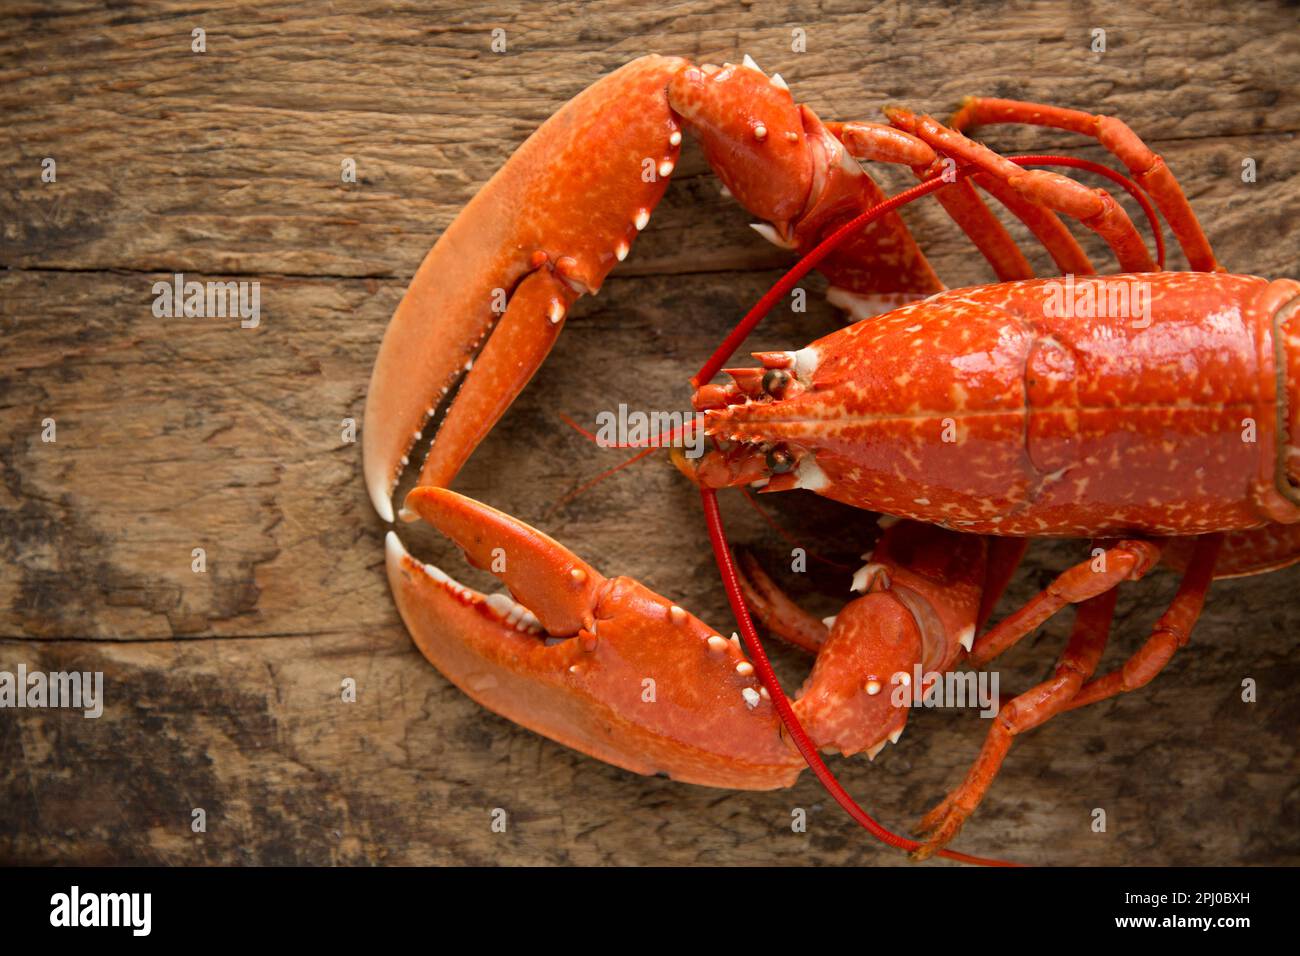 A cooked, boiled lobster, Homarus gammarus, that was caught in the English Channel. Dorset England UK GB Stock Photo